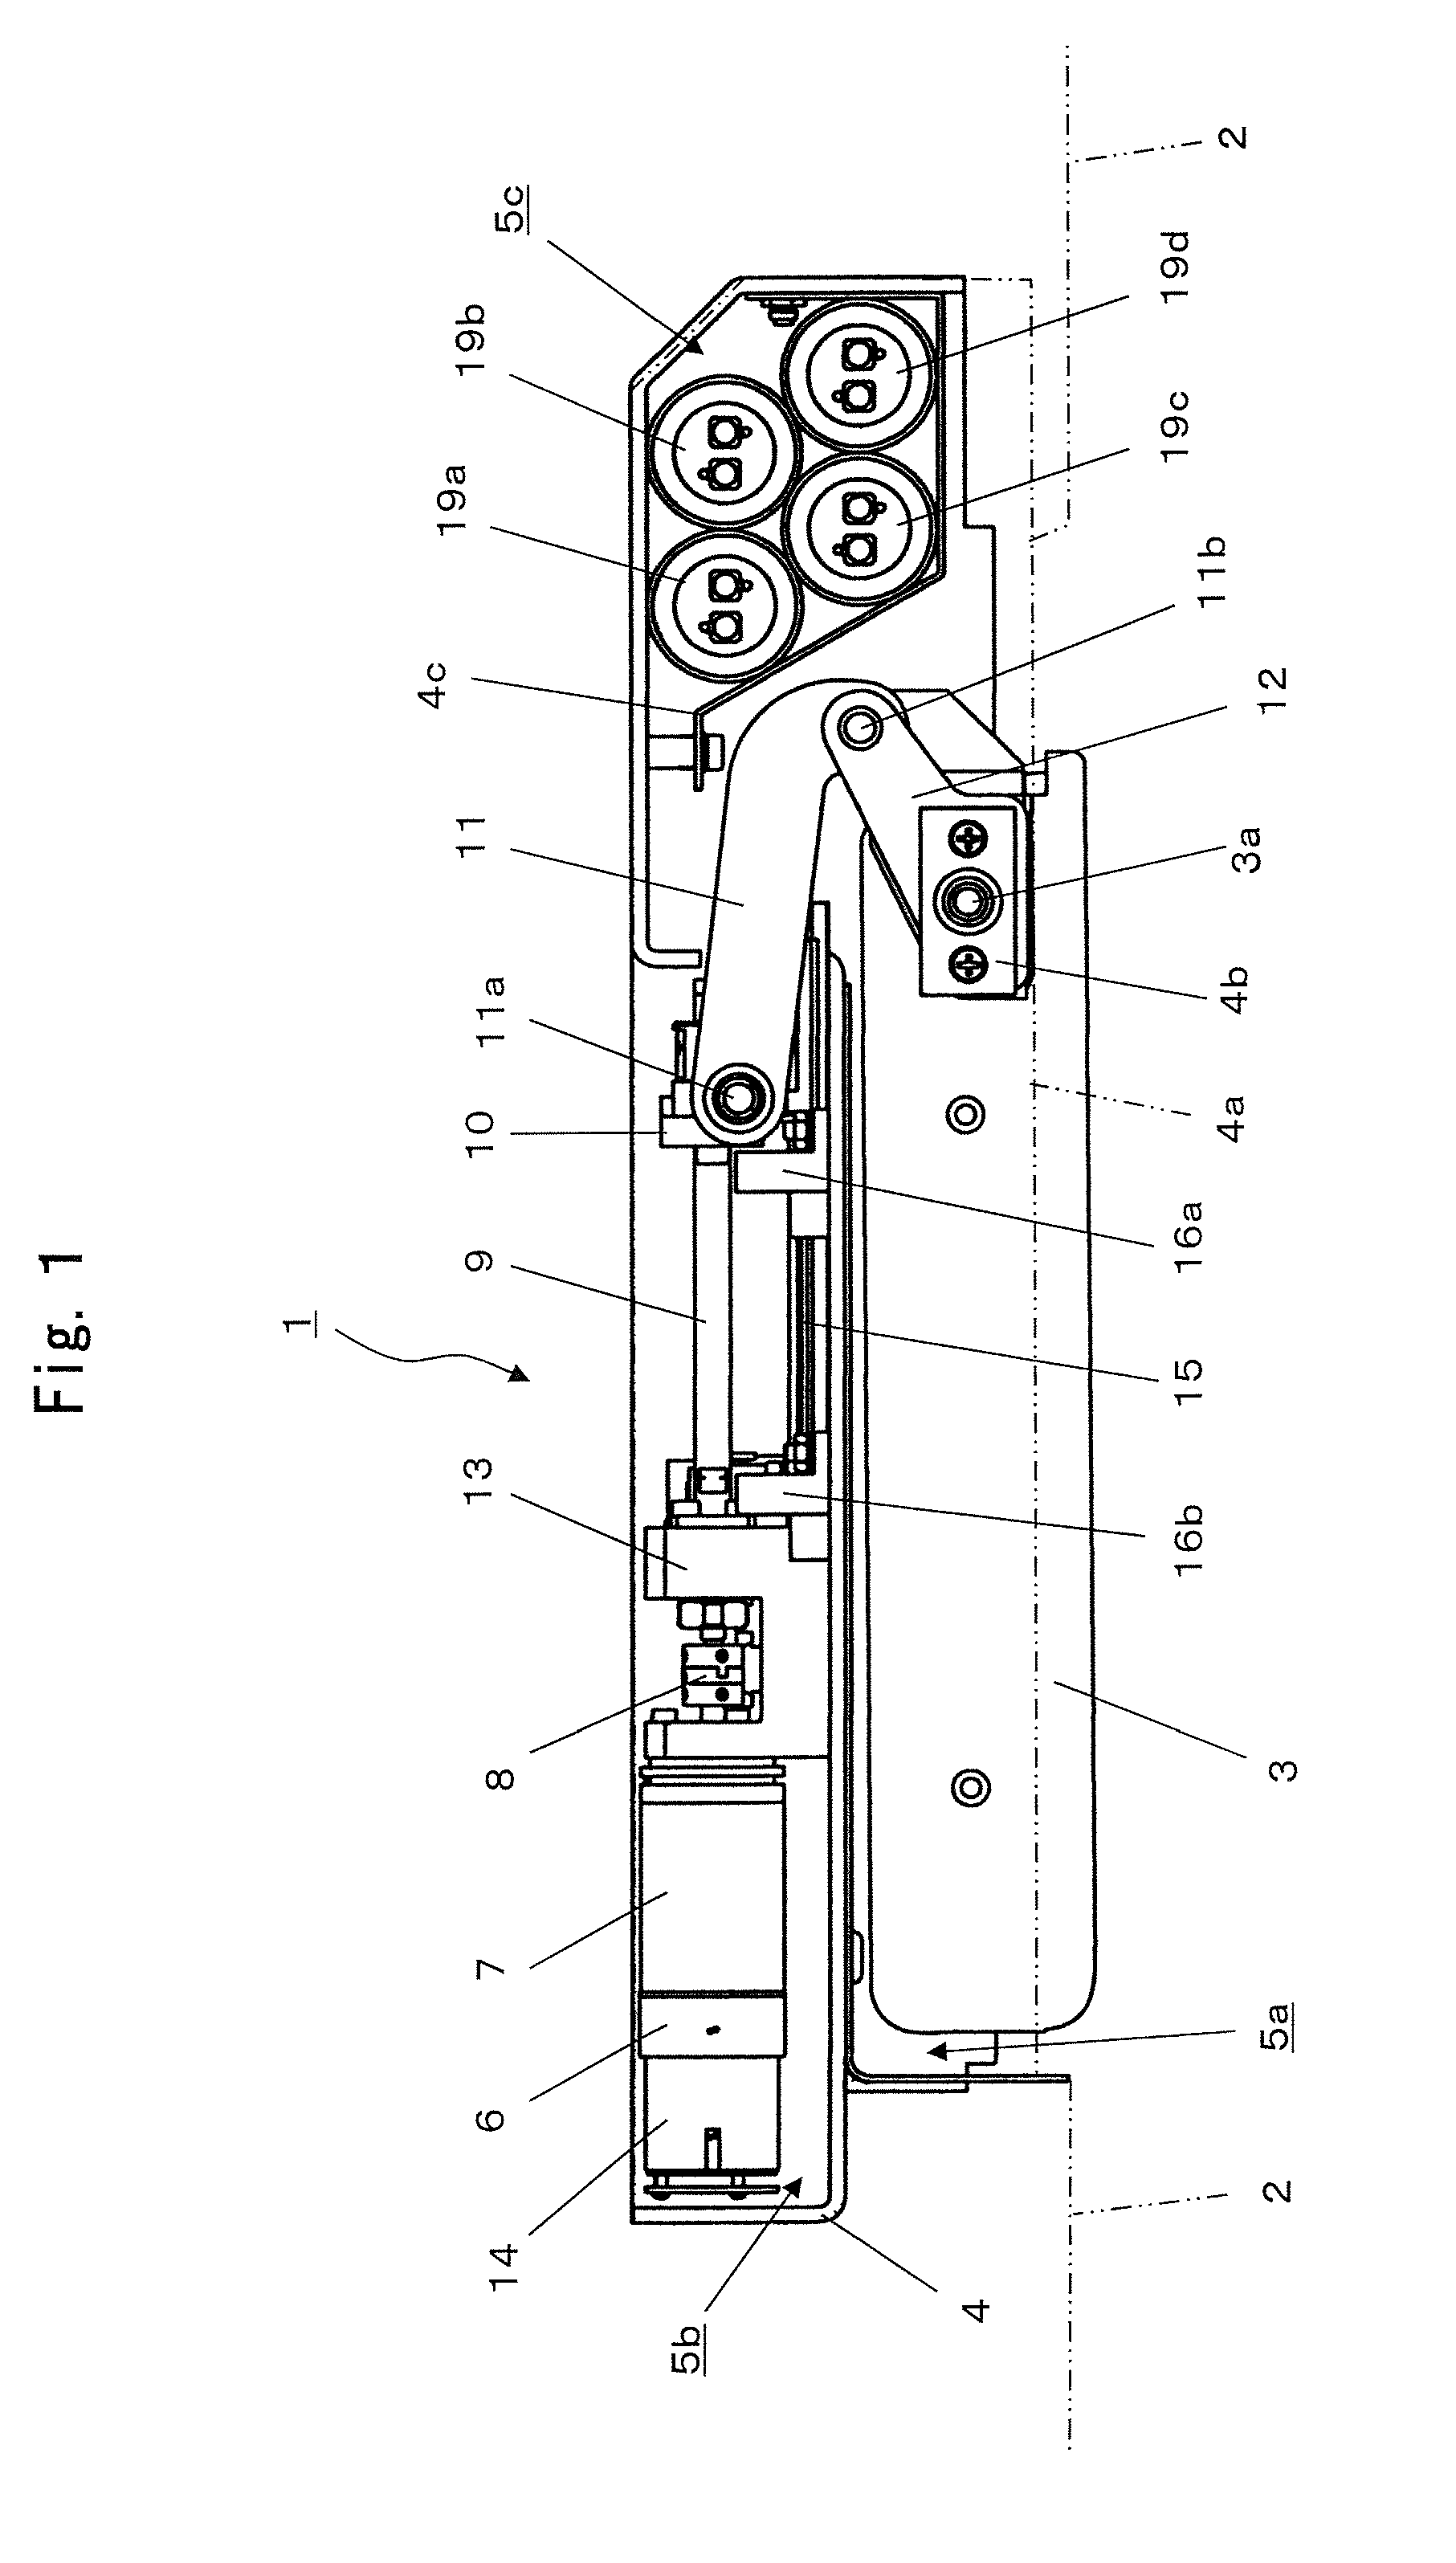 Pivoting display device used in aircraft